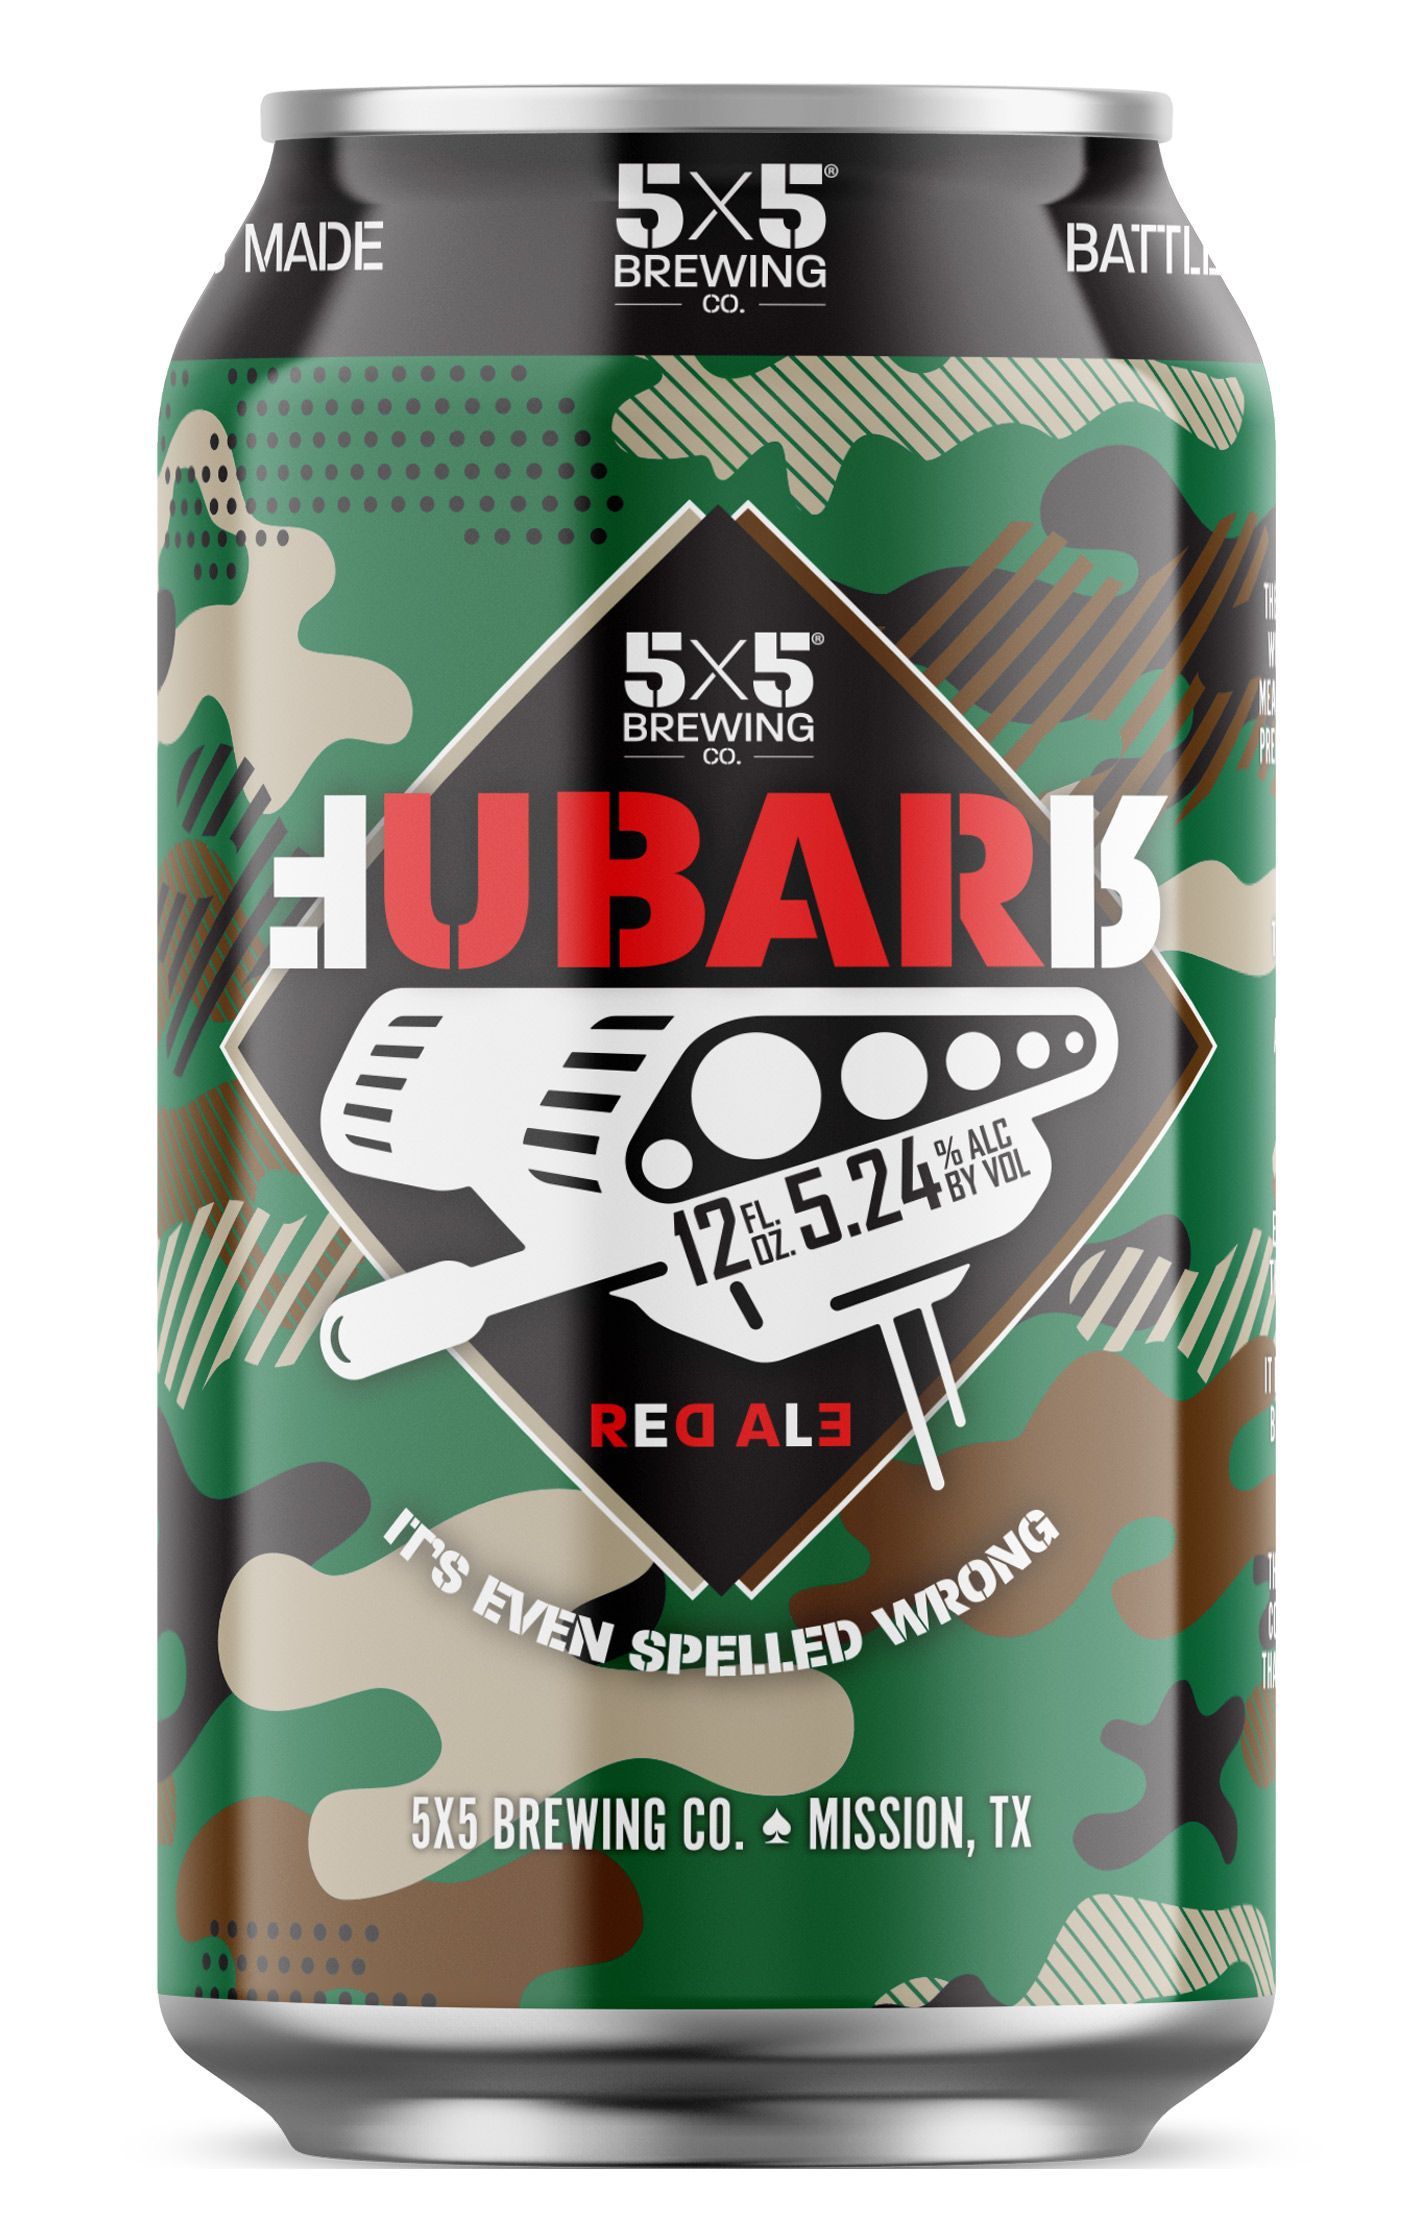 A can of beer with a camouflage design on it.